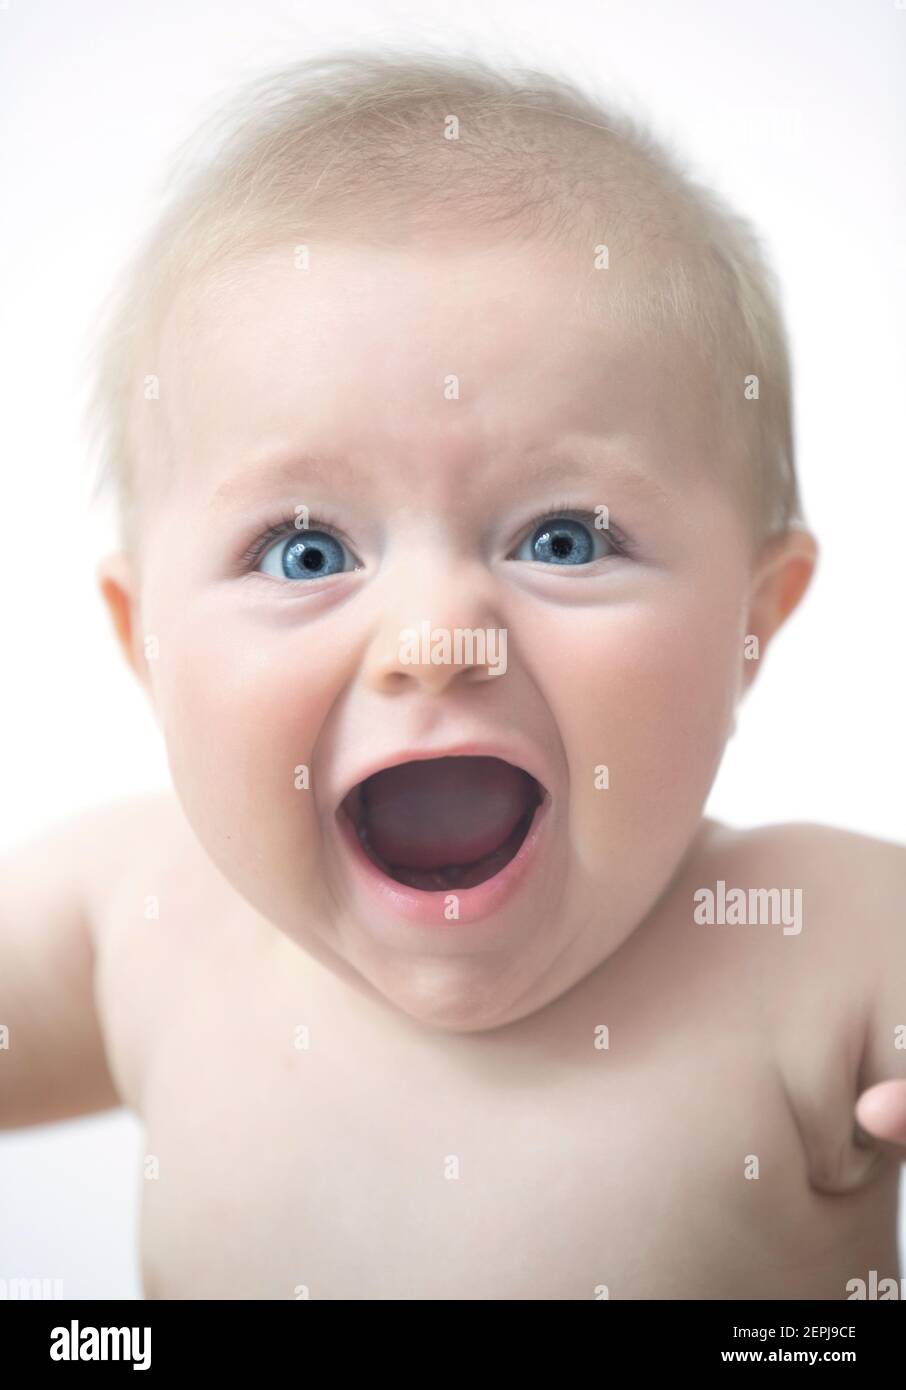 An adorable 7 month old baby boy with blue eyes and blond hair looking happy and excited. Stock Photo